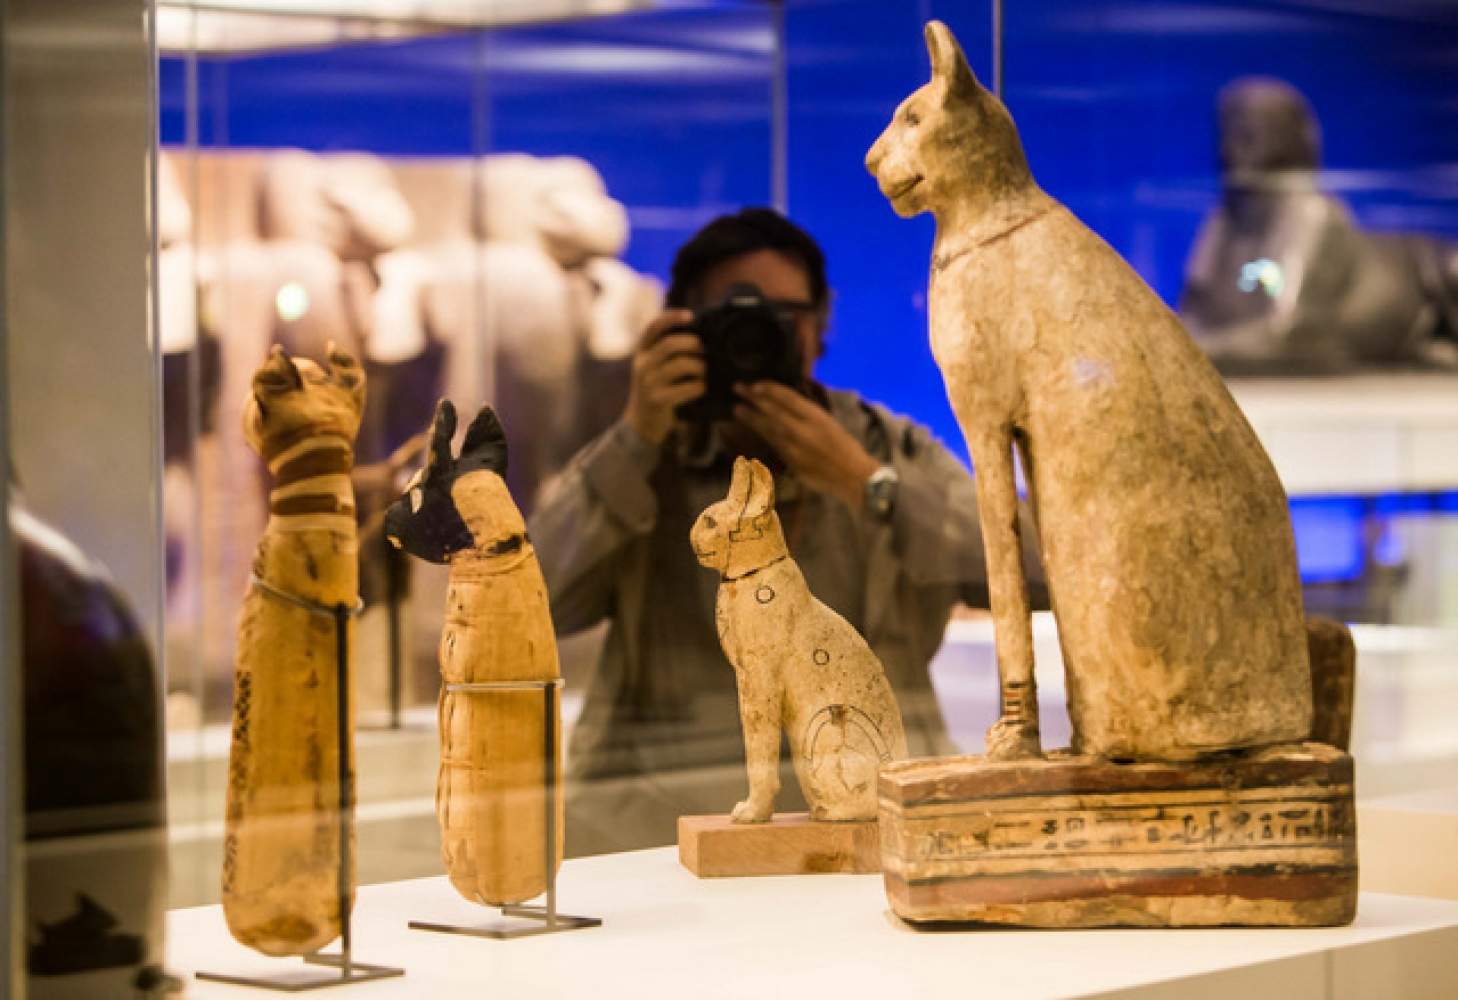 1000x1000 21149 animals and pharaohs a luxurious exhibition of egyptian treasures in madrid 1 large